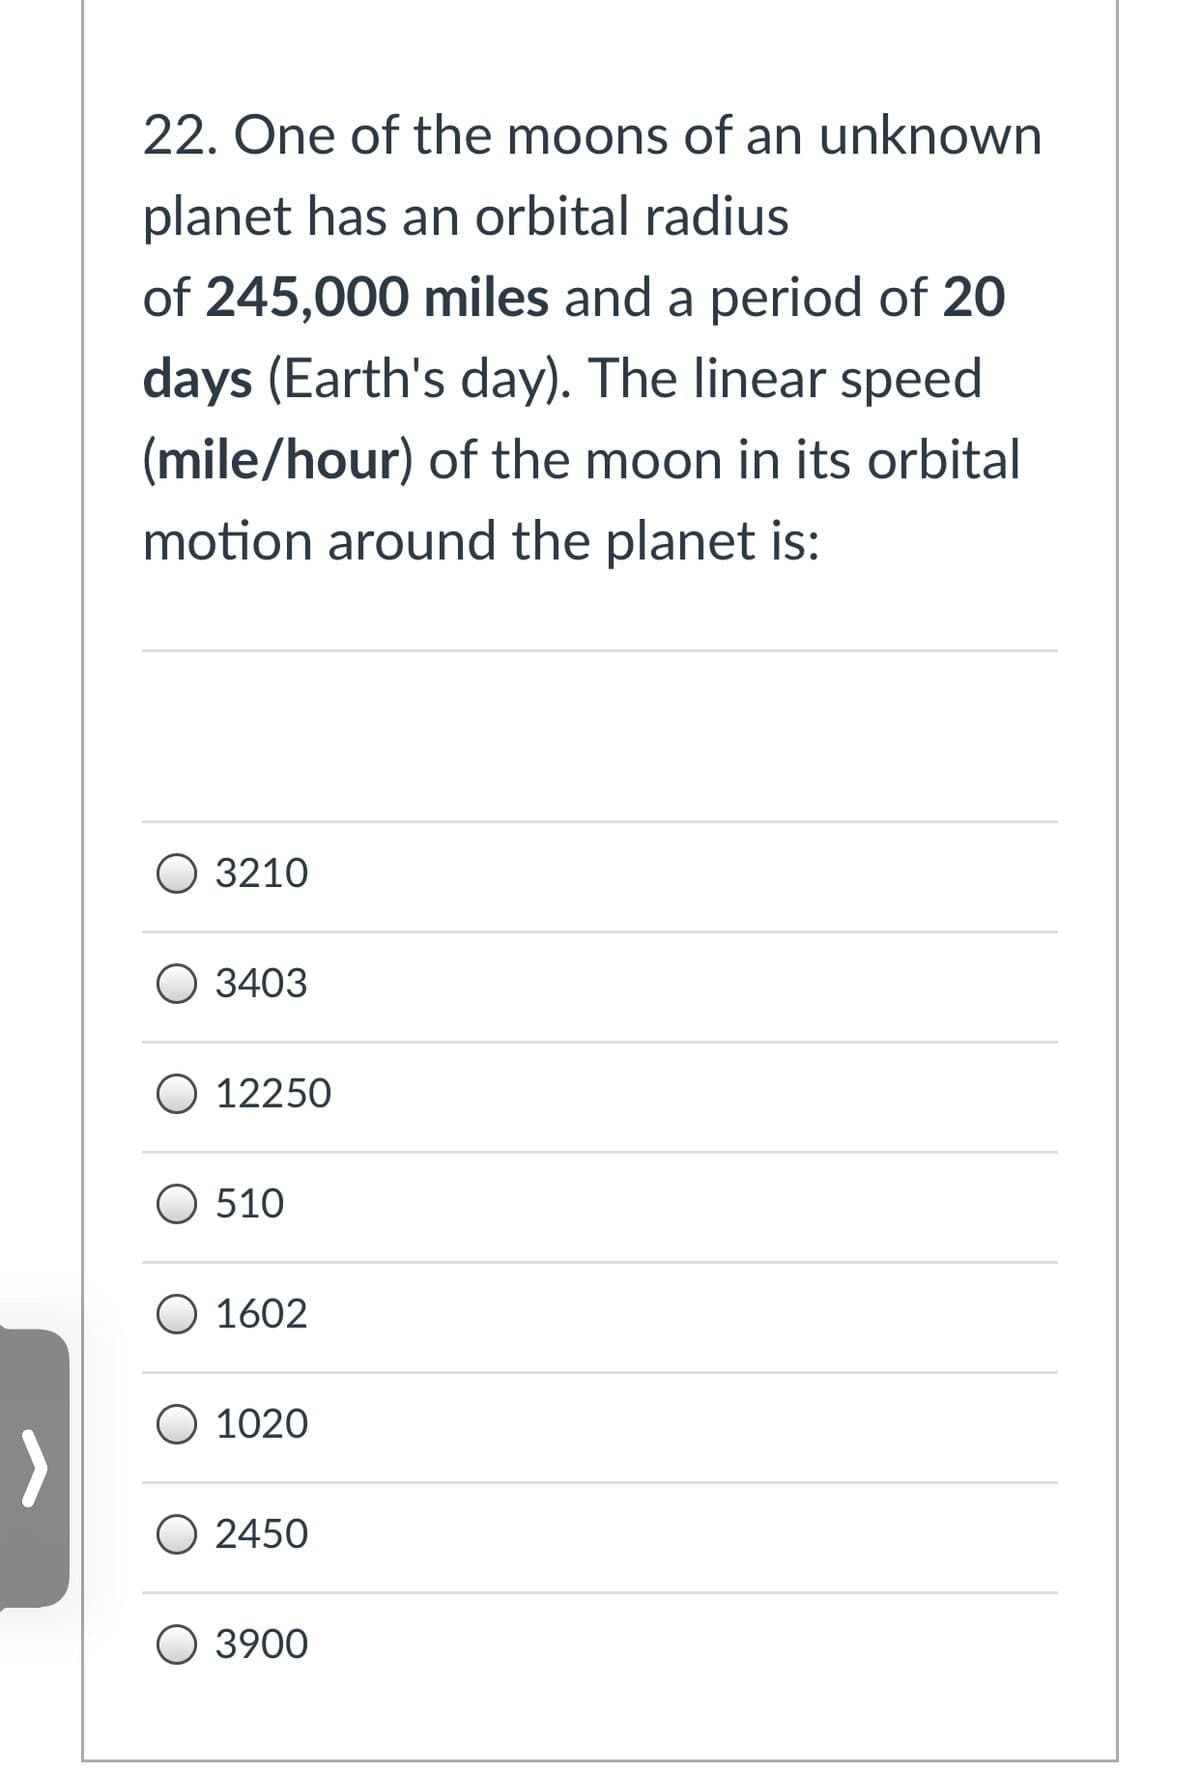 22. One of the moons of an unknown
planet has an orbital radius
of 245,000 miles and a period of 20
days (Earth's day). The linear speed
(mile/hour) of the moon in its orbital
motion around the planet is:
О 3210
О 3403
O 12250
O 510
O 1602
O 1020
O 2450
О 3900
